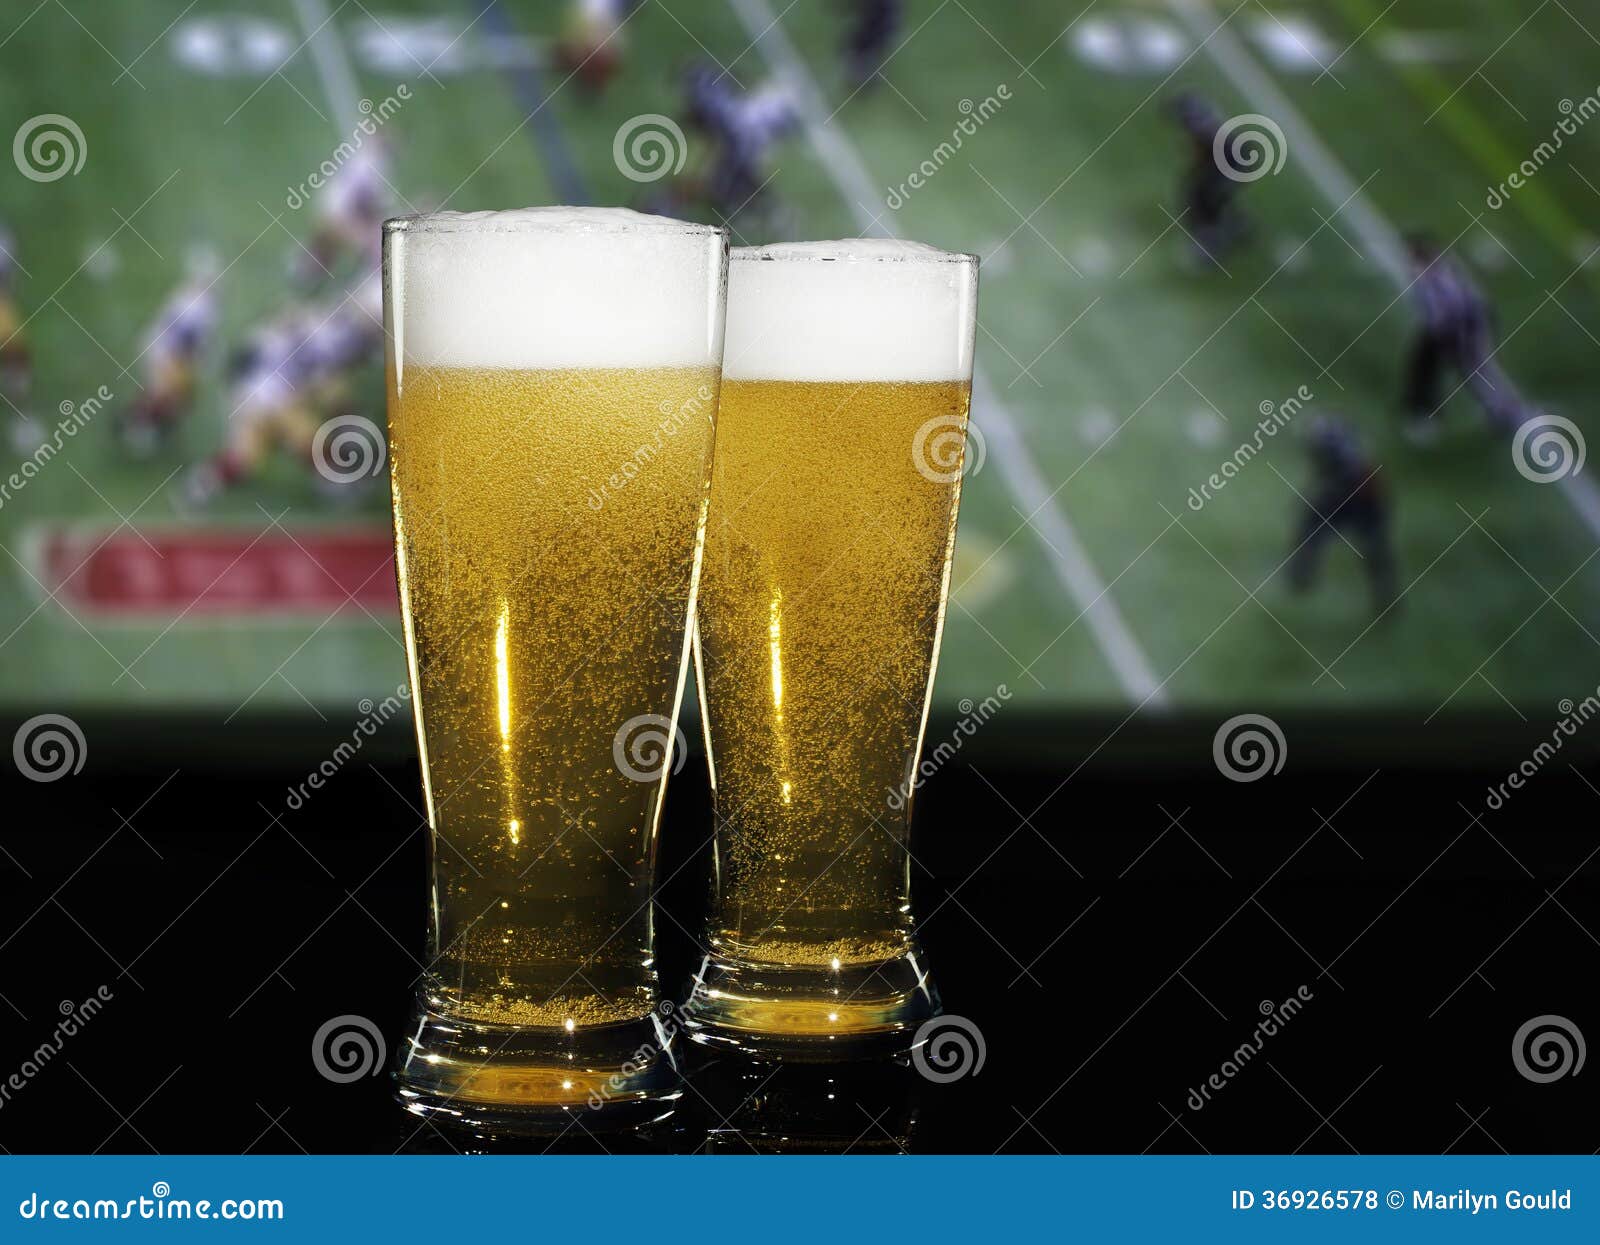 Beer Football Royalty Free Stock Photos   Image: 36926578  football and beer filled